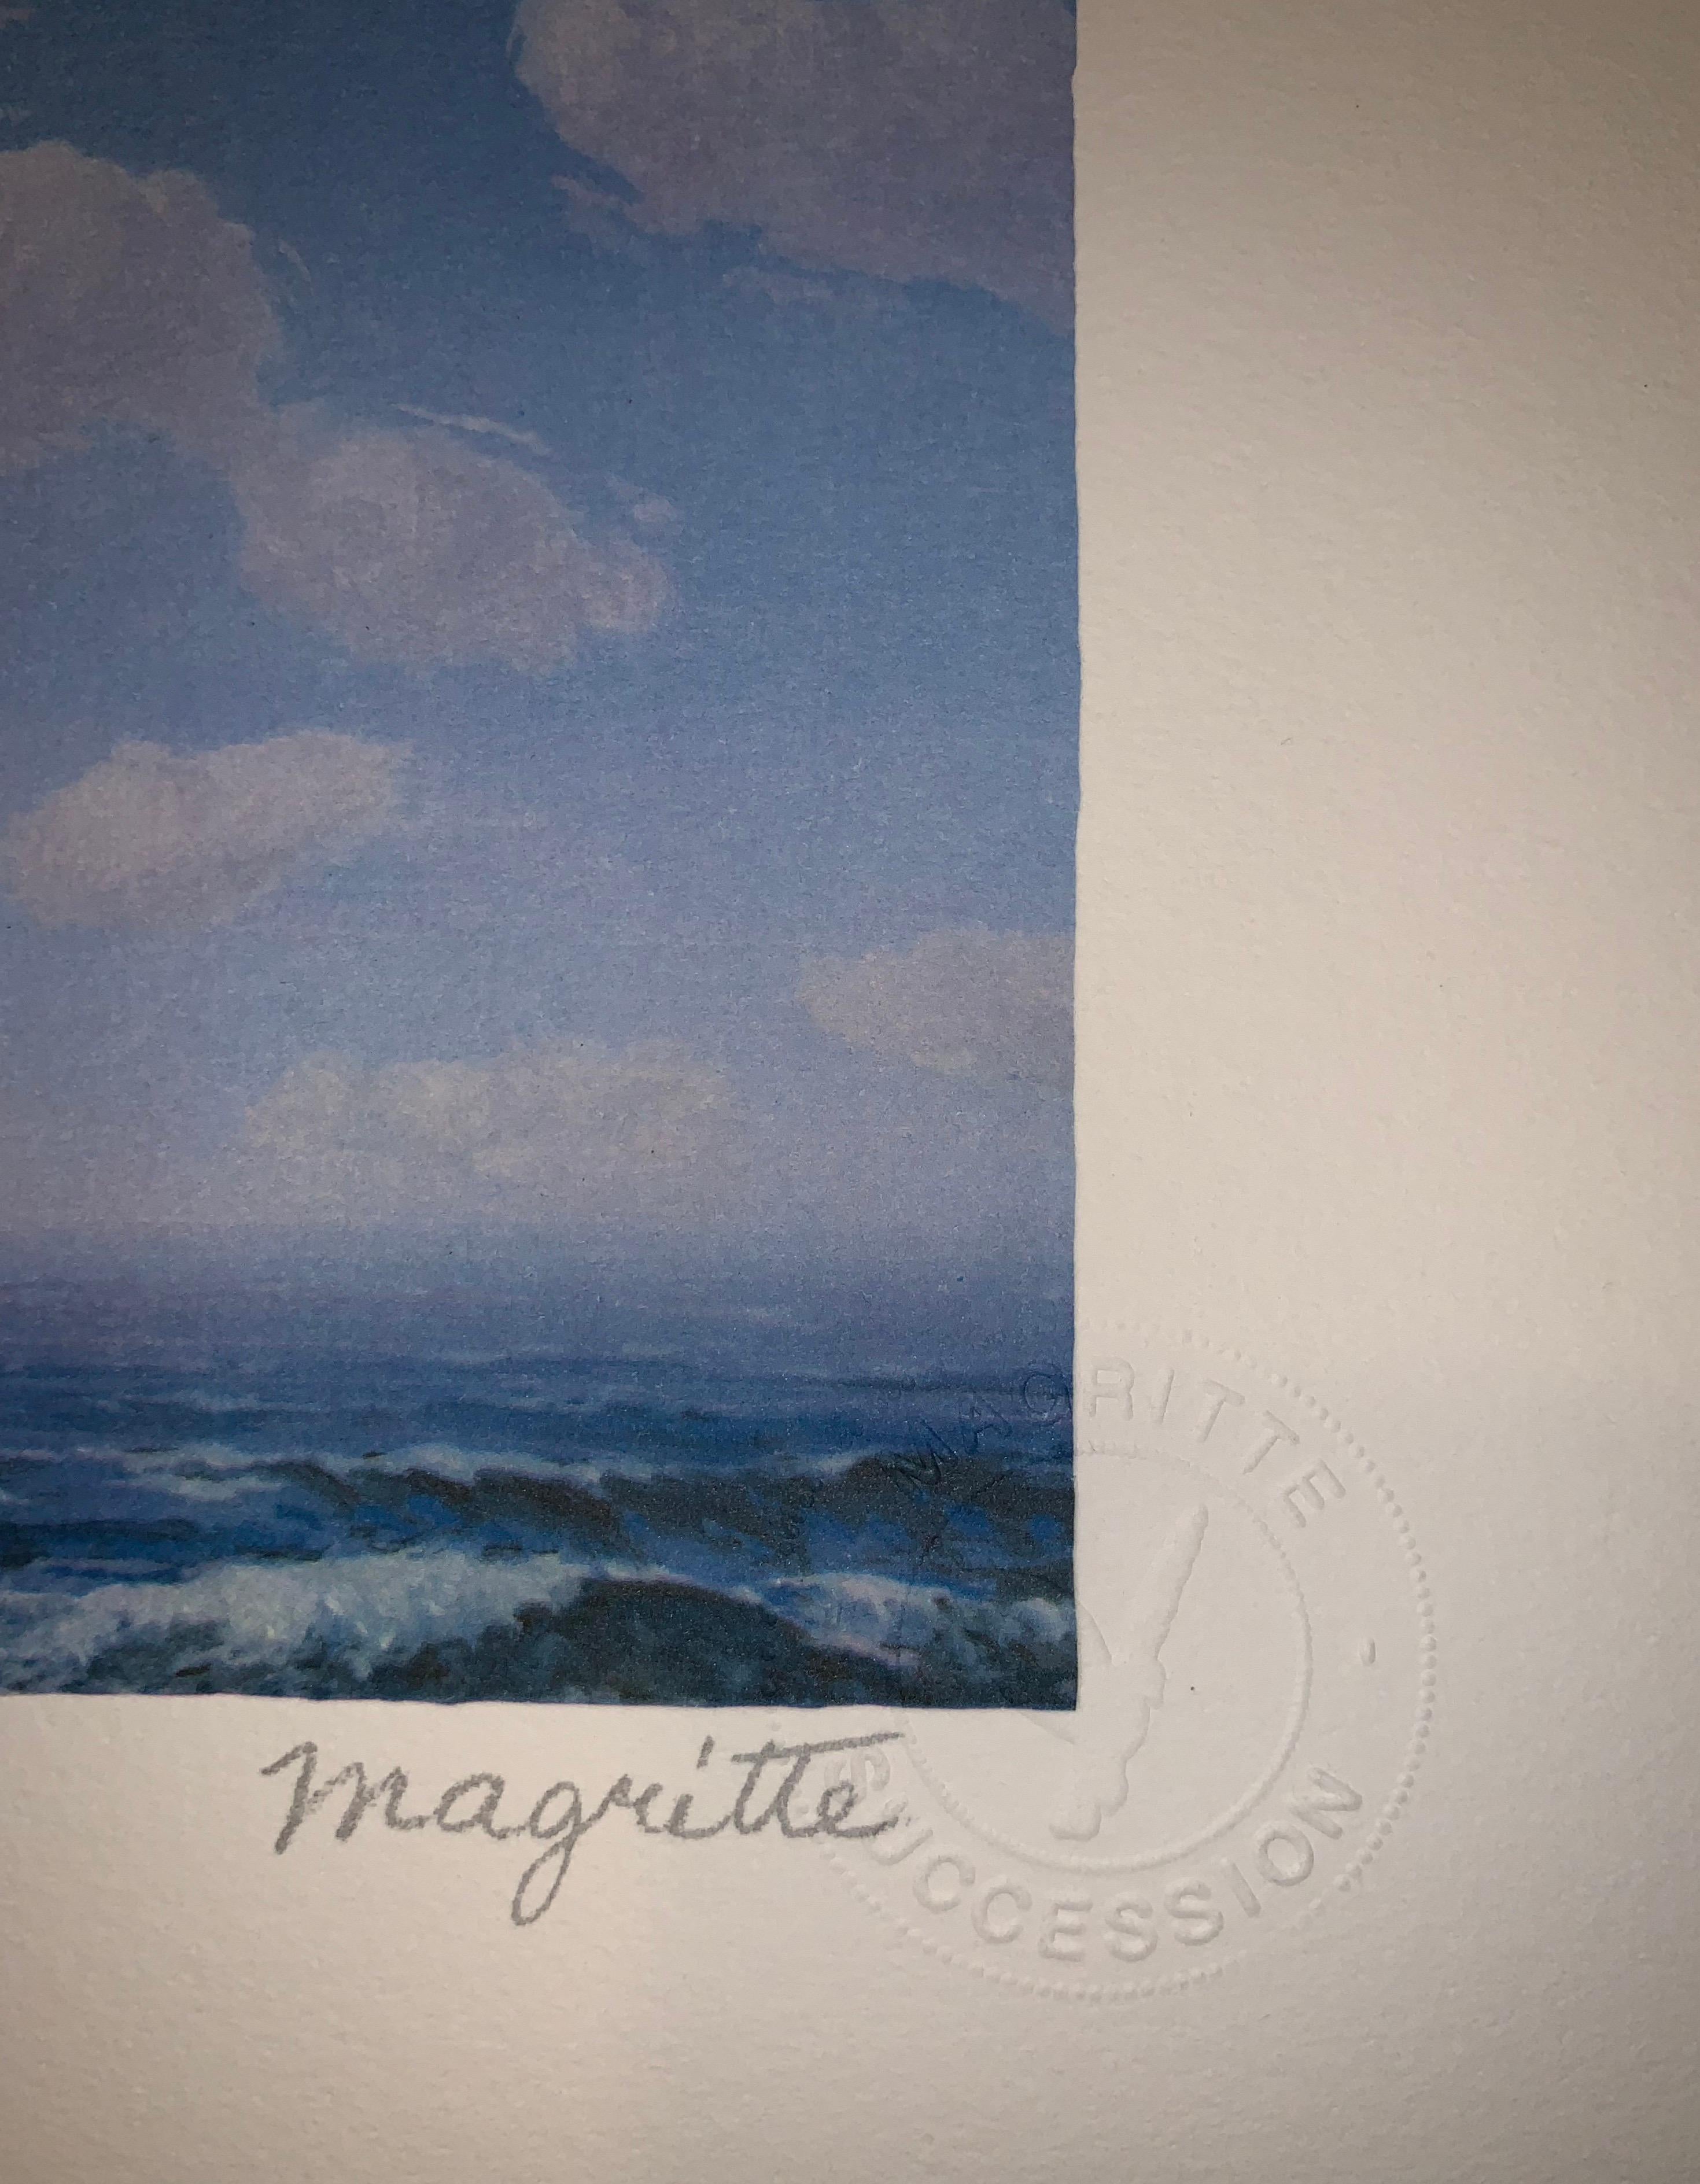 Color lithograph after the 1964 oil on canvas by René Magritte, printed signature of Magritte and numbered from the edition of 300. 
The lithograph features the dry stamps of the Magritte Foundation & ADAGP and is countersigned in pencil by Mr.